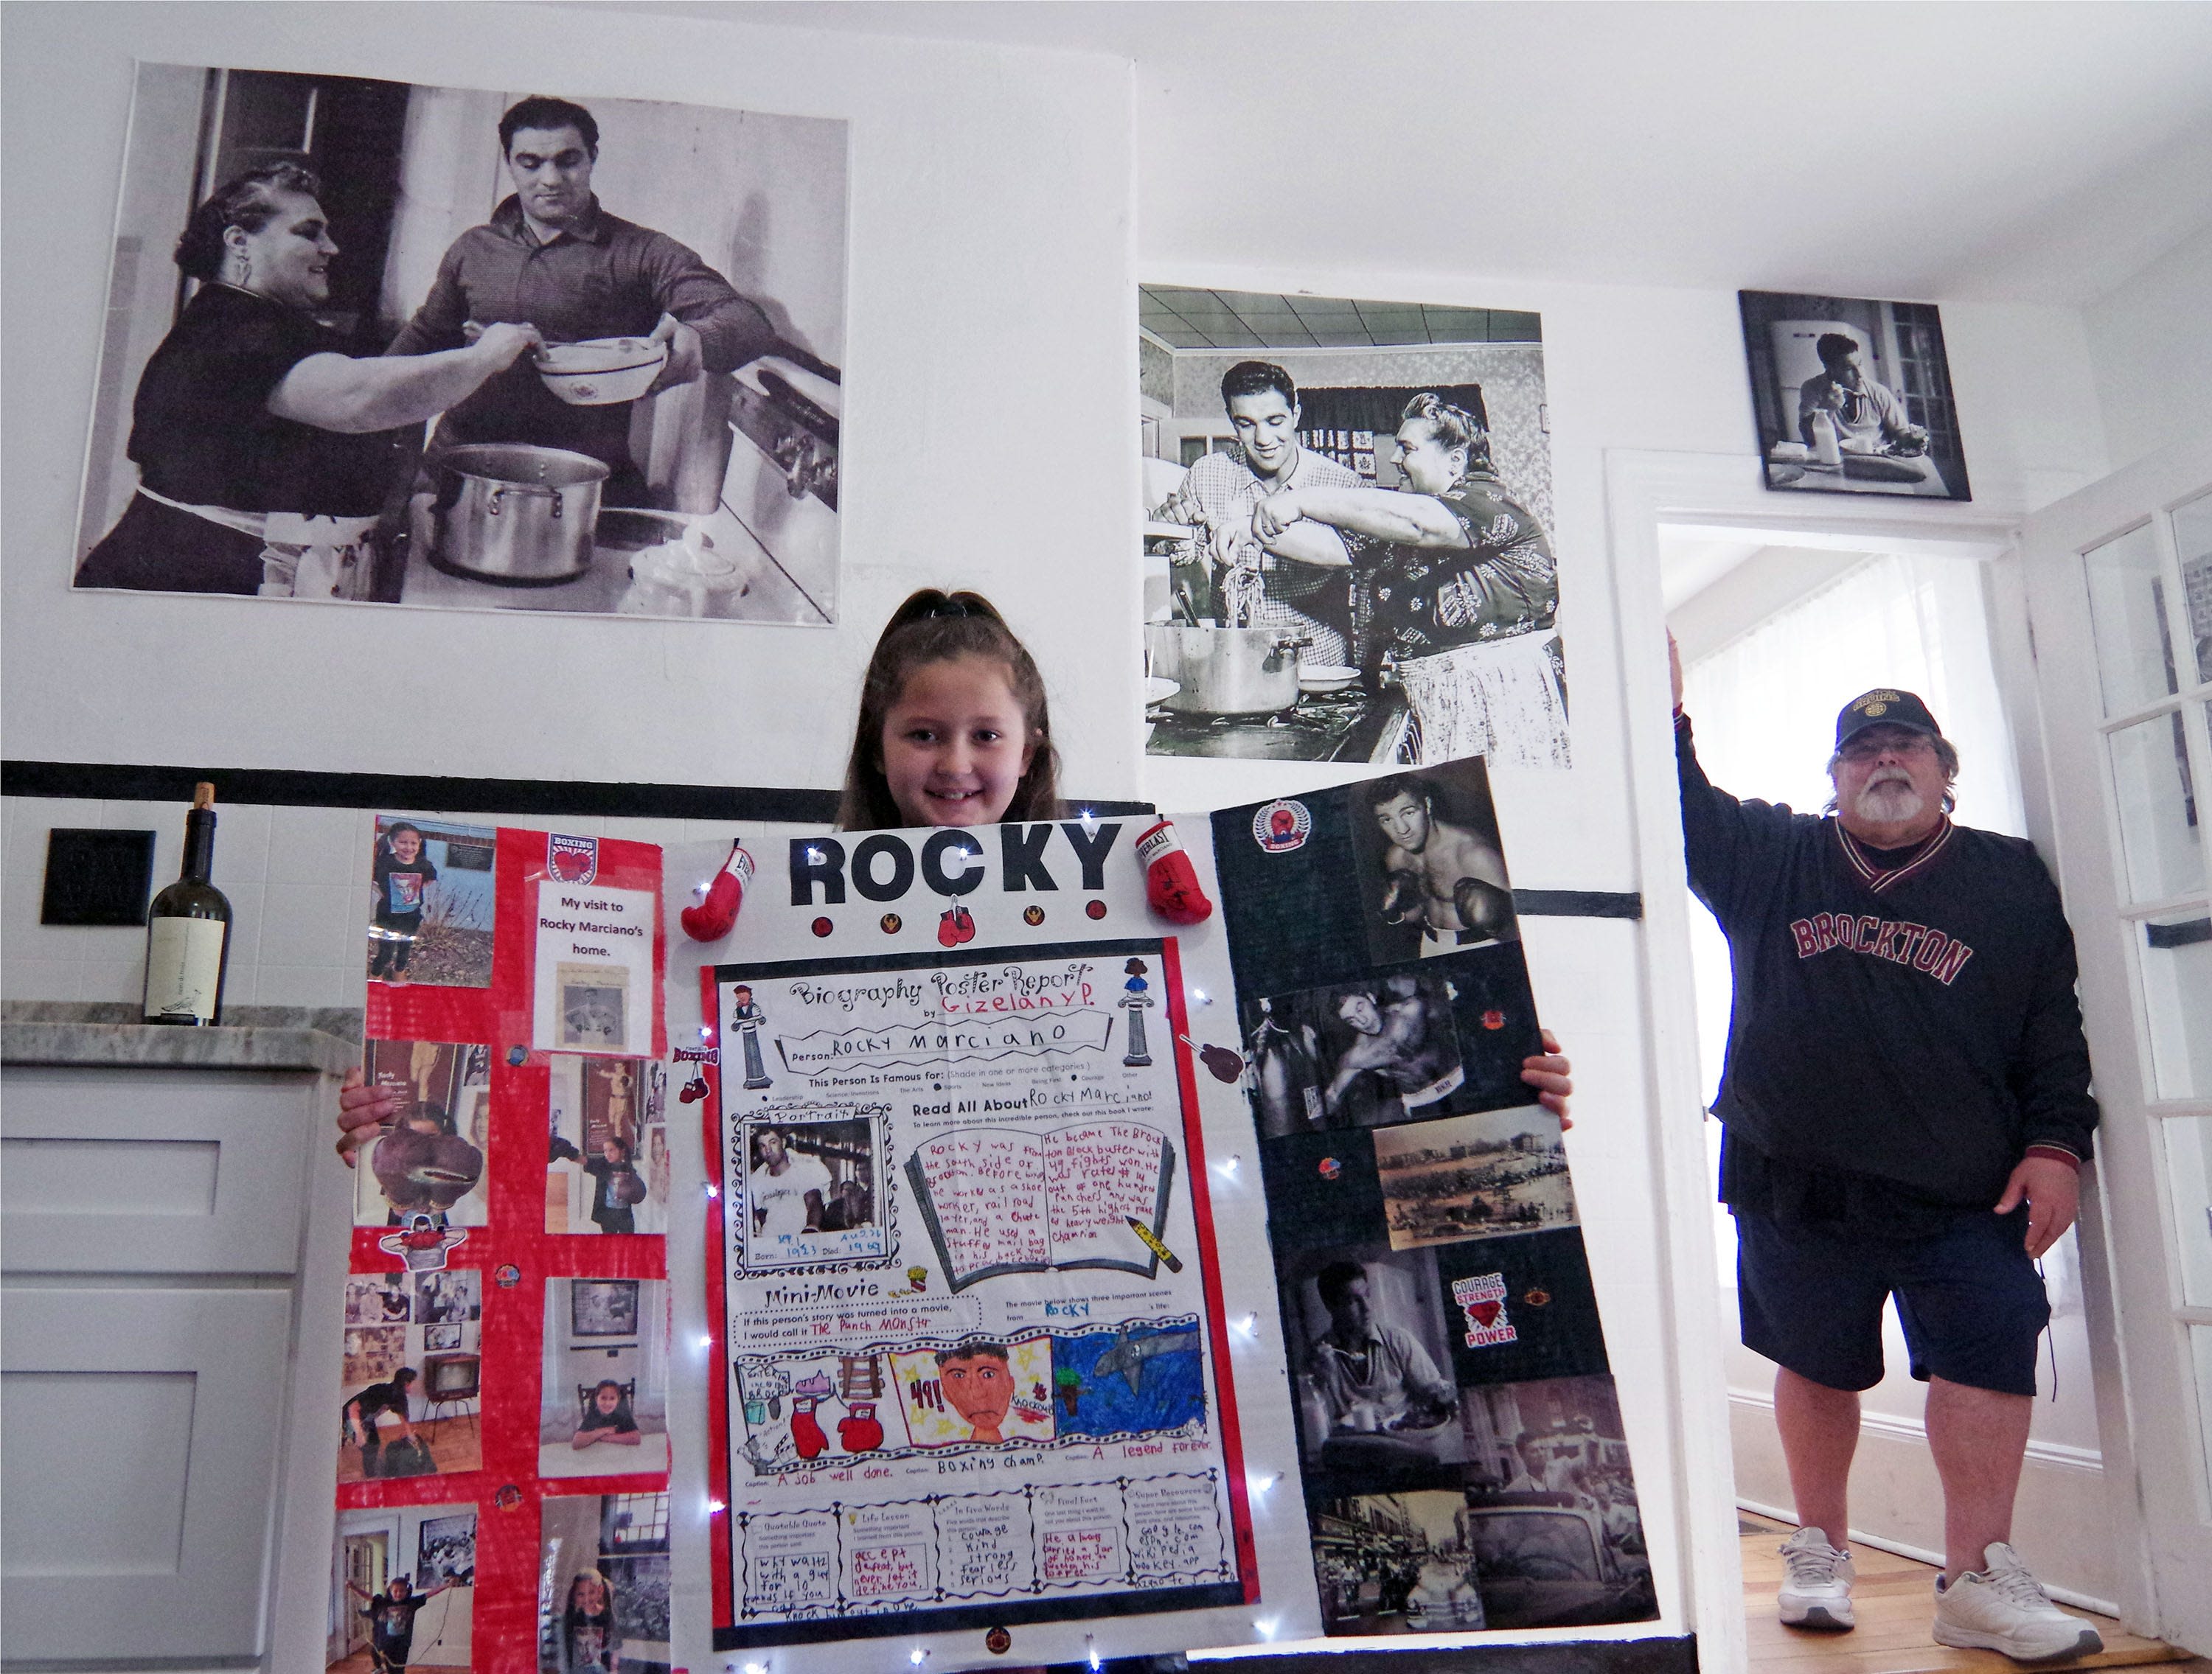 Rocky Marciano house is a shrine to boxing champ. Will it make it onto National Register?